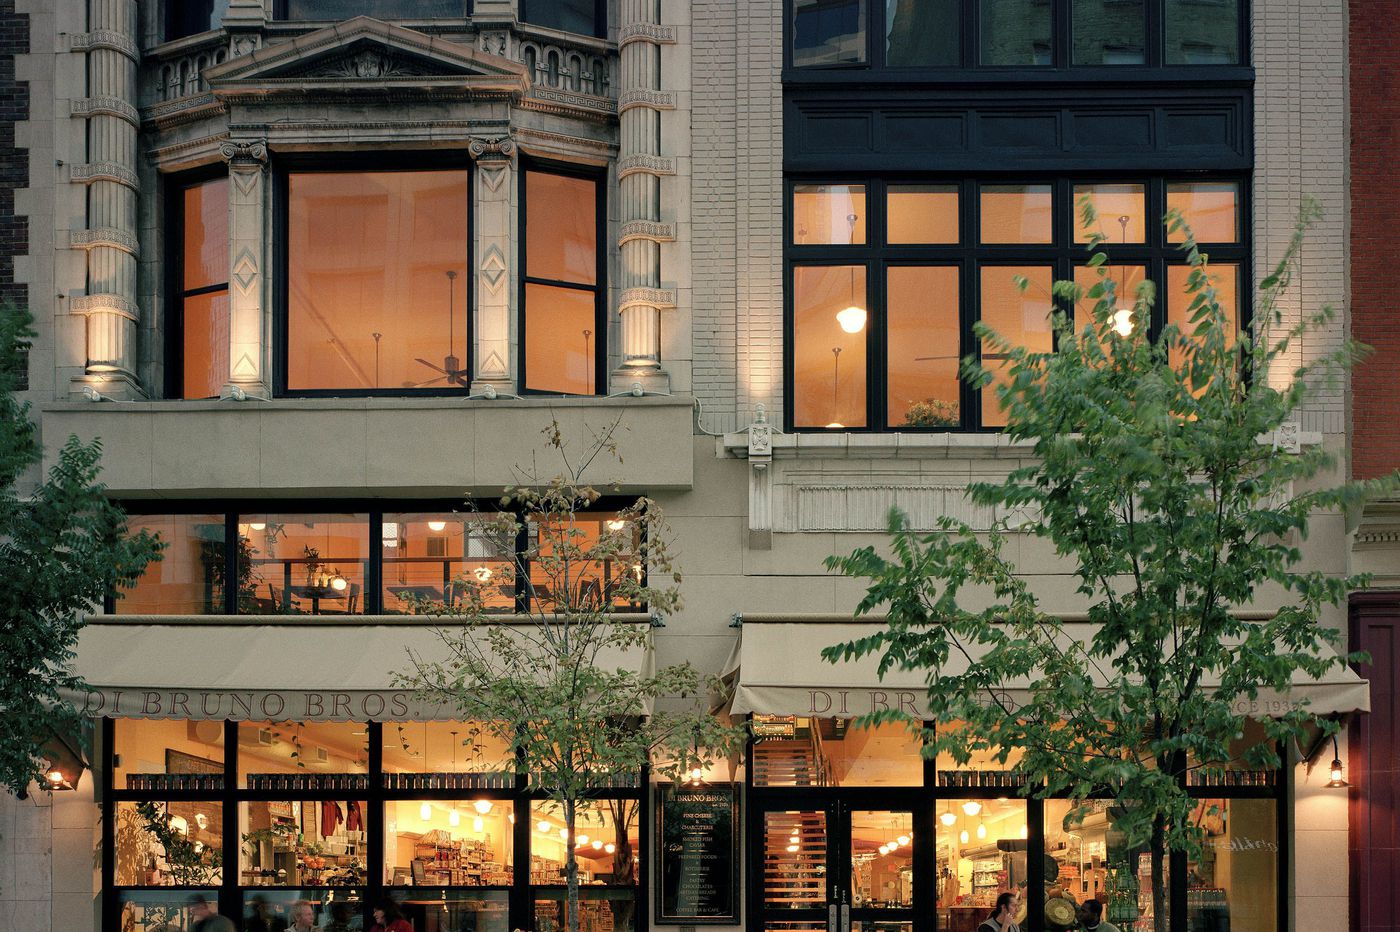  Di Bruno Bros. to open a wine bar and cafe called Alimentari at its Rittenhouse location